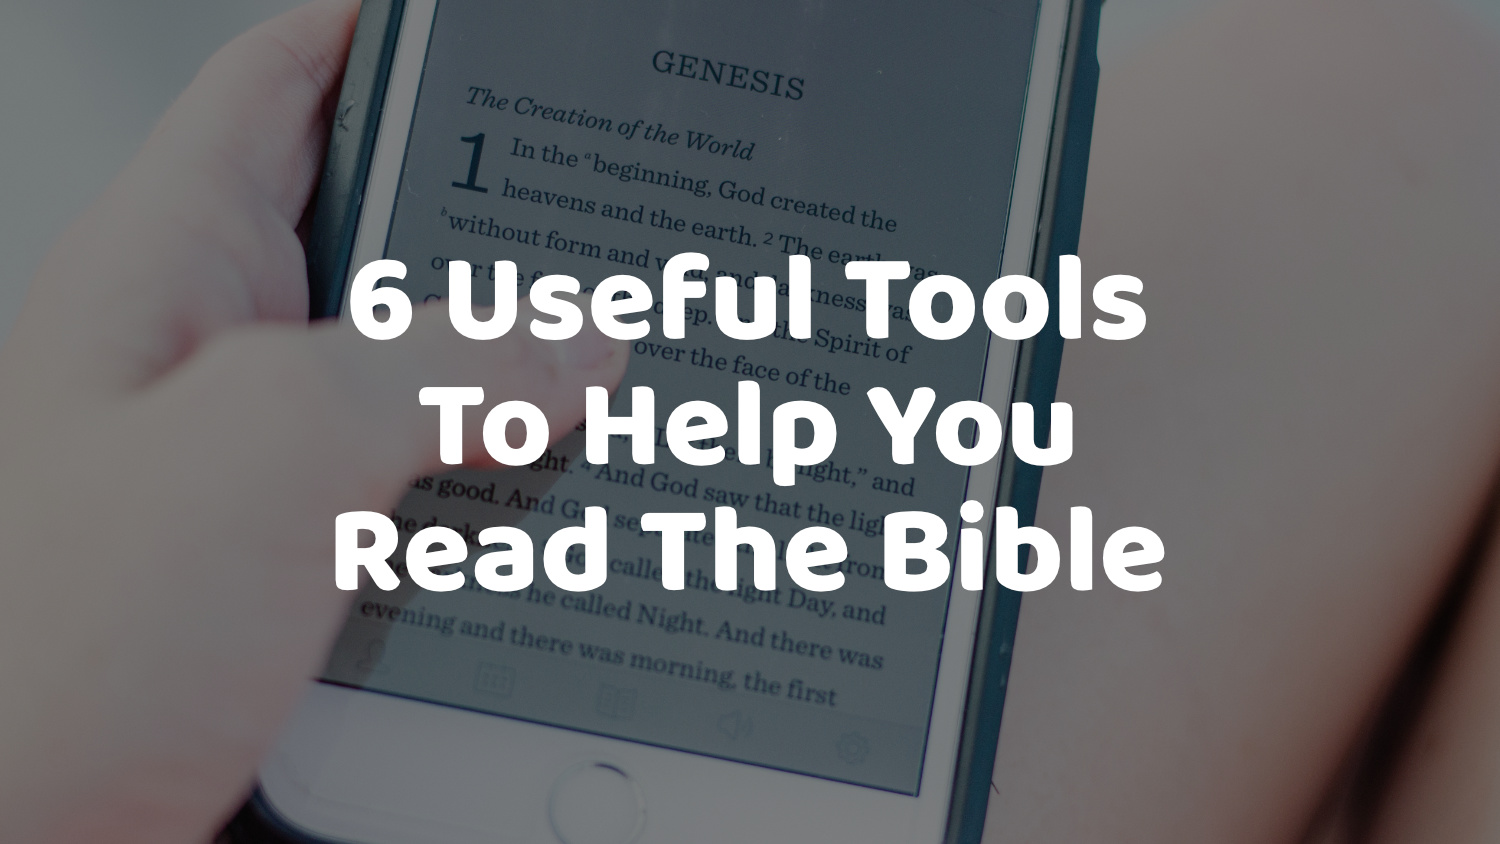 6 Useful Tools To Help You Read The Bible